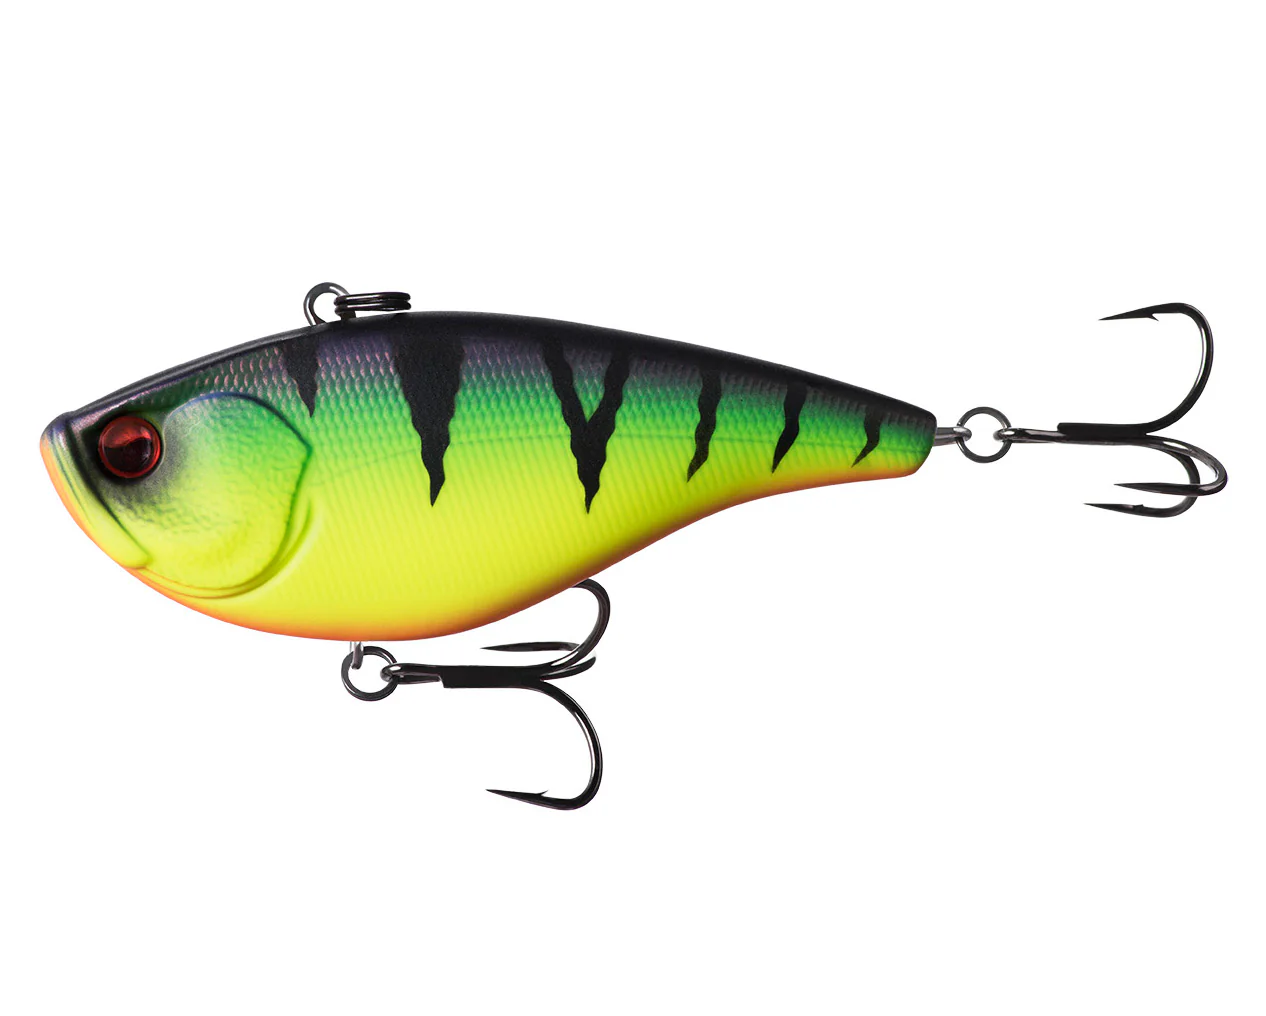 How to Make a Lipless Crankbait